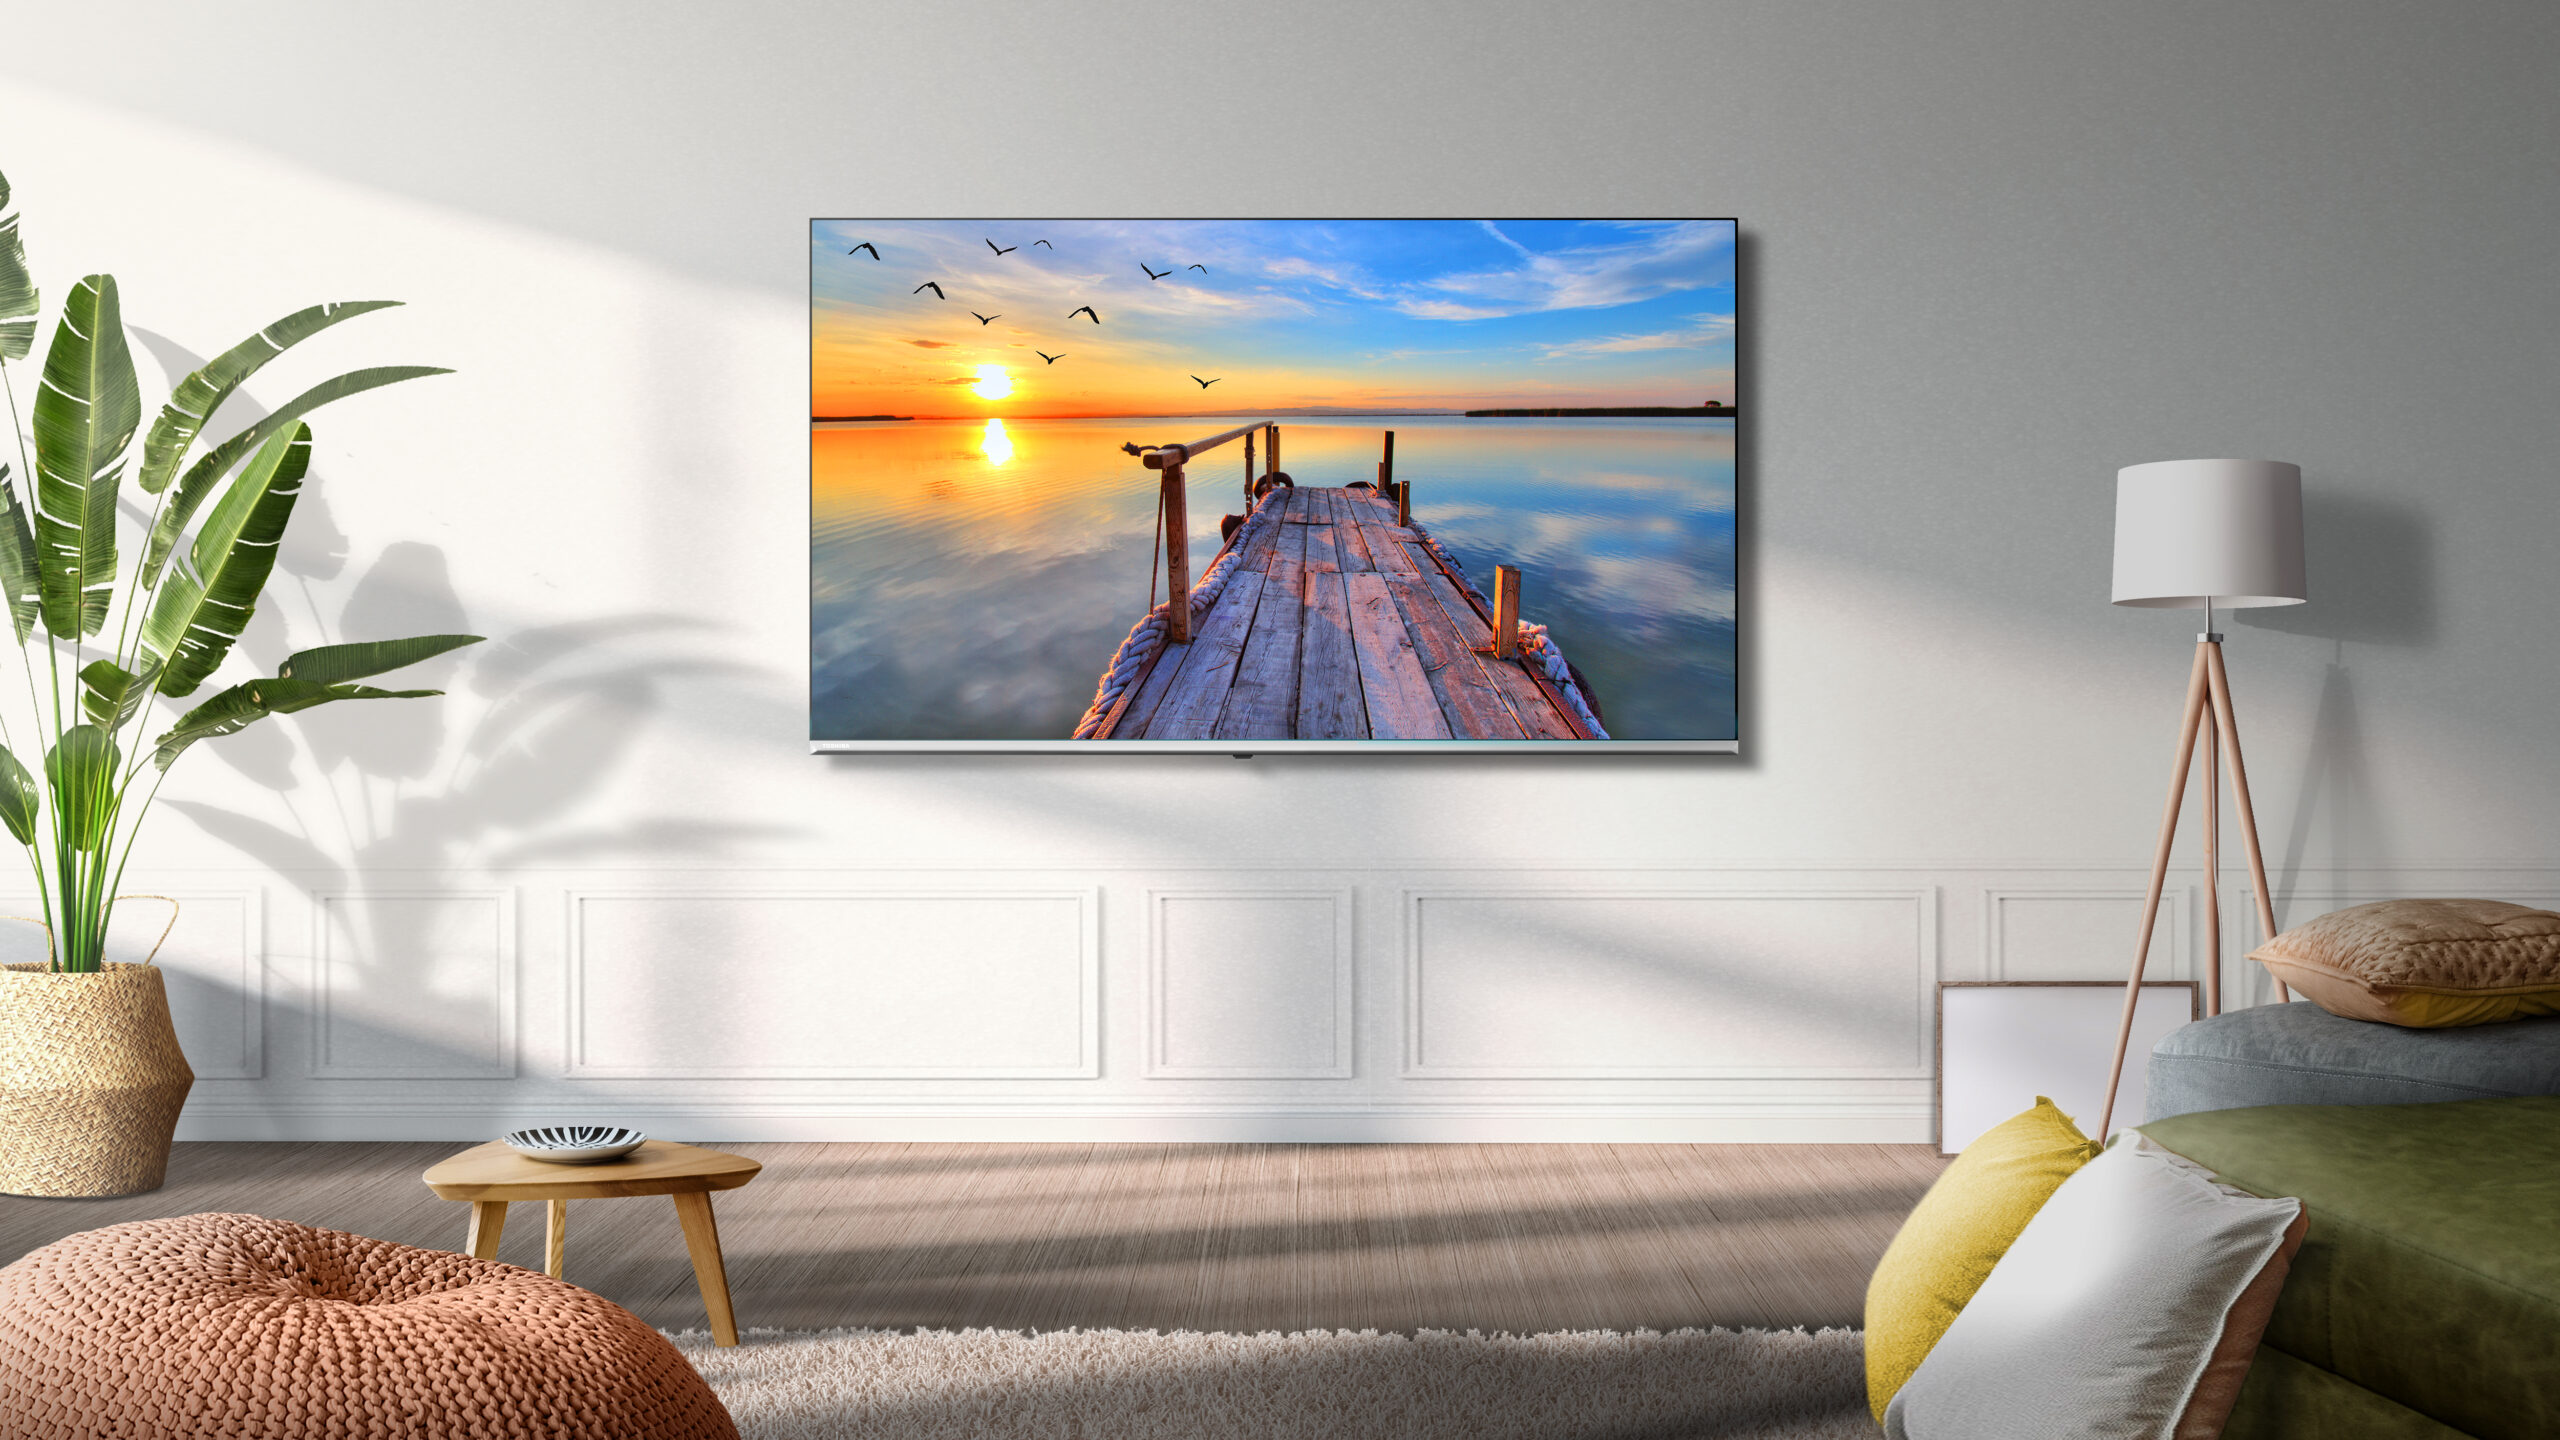 Toshiba TV are back in Malaysia with its C350 series & V35 series 9